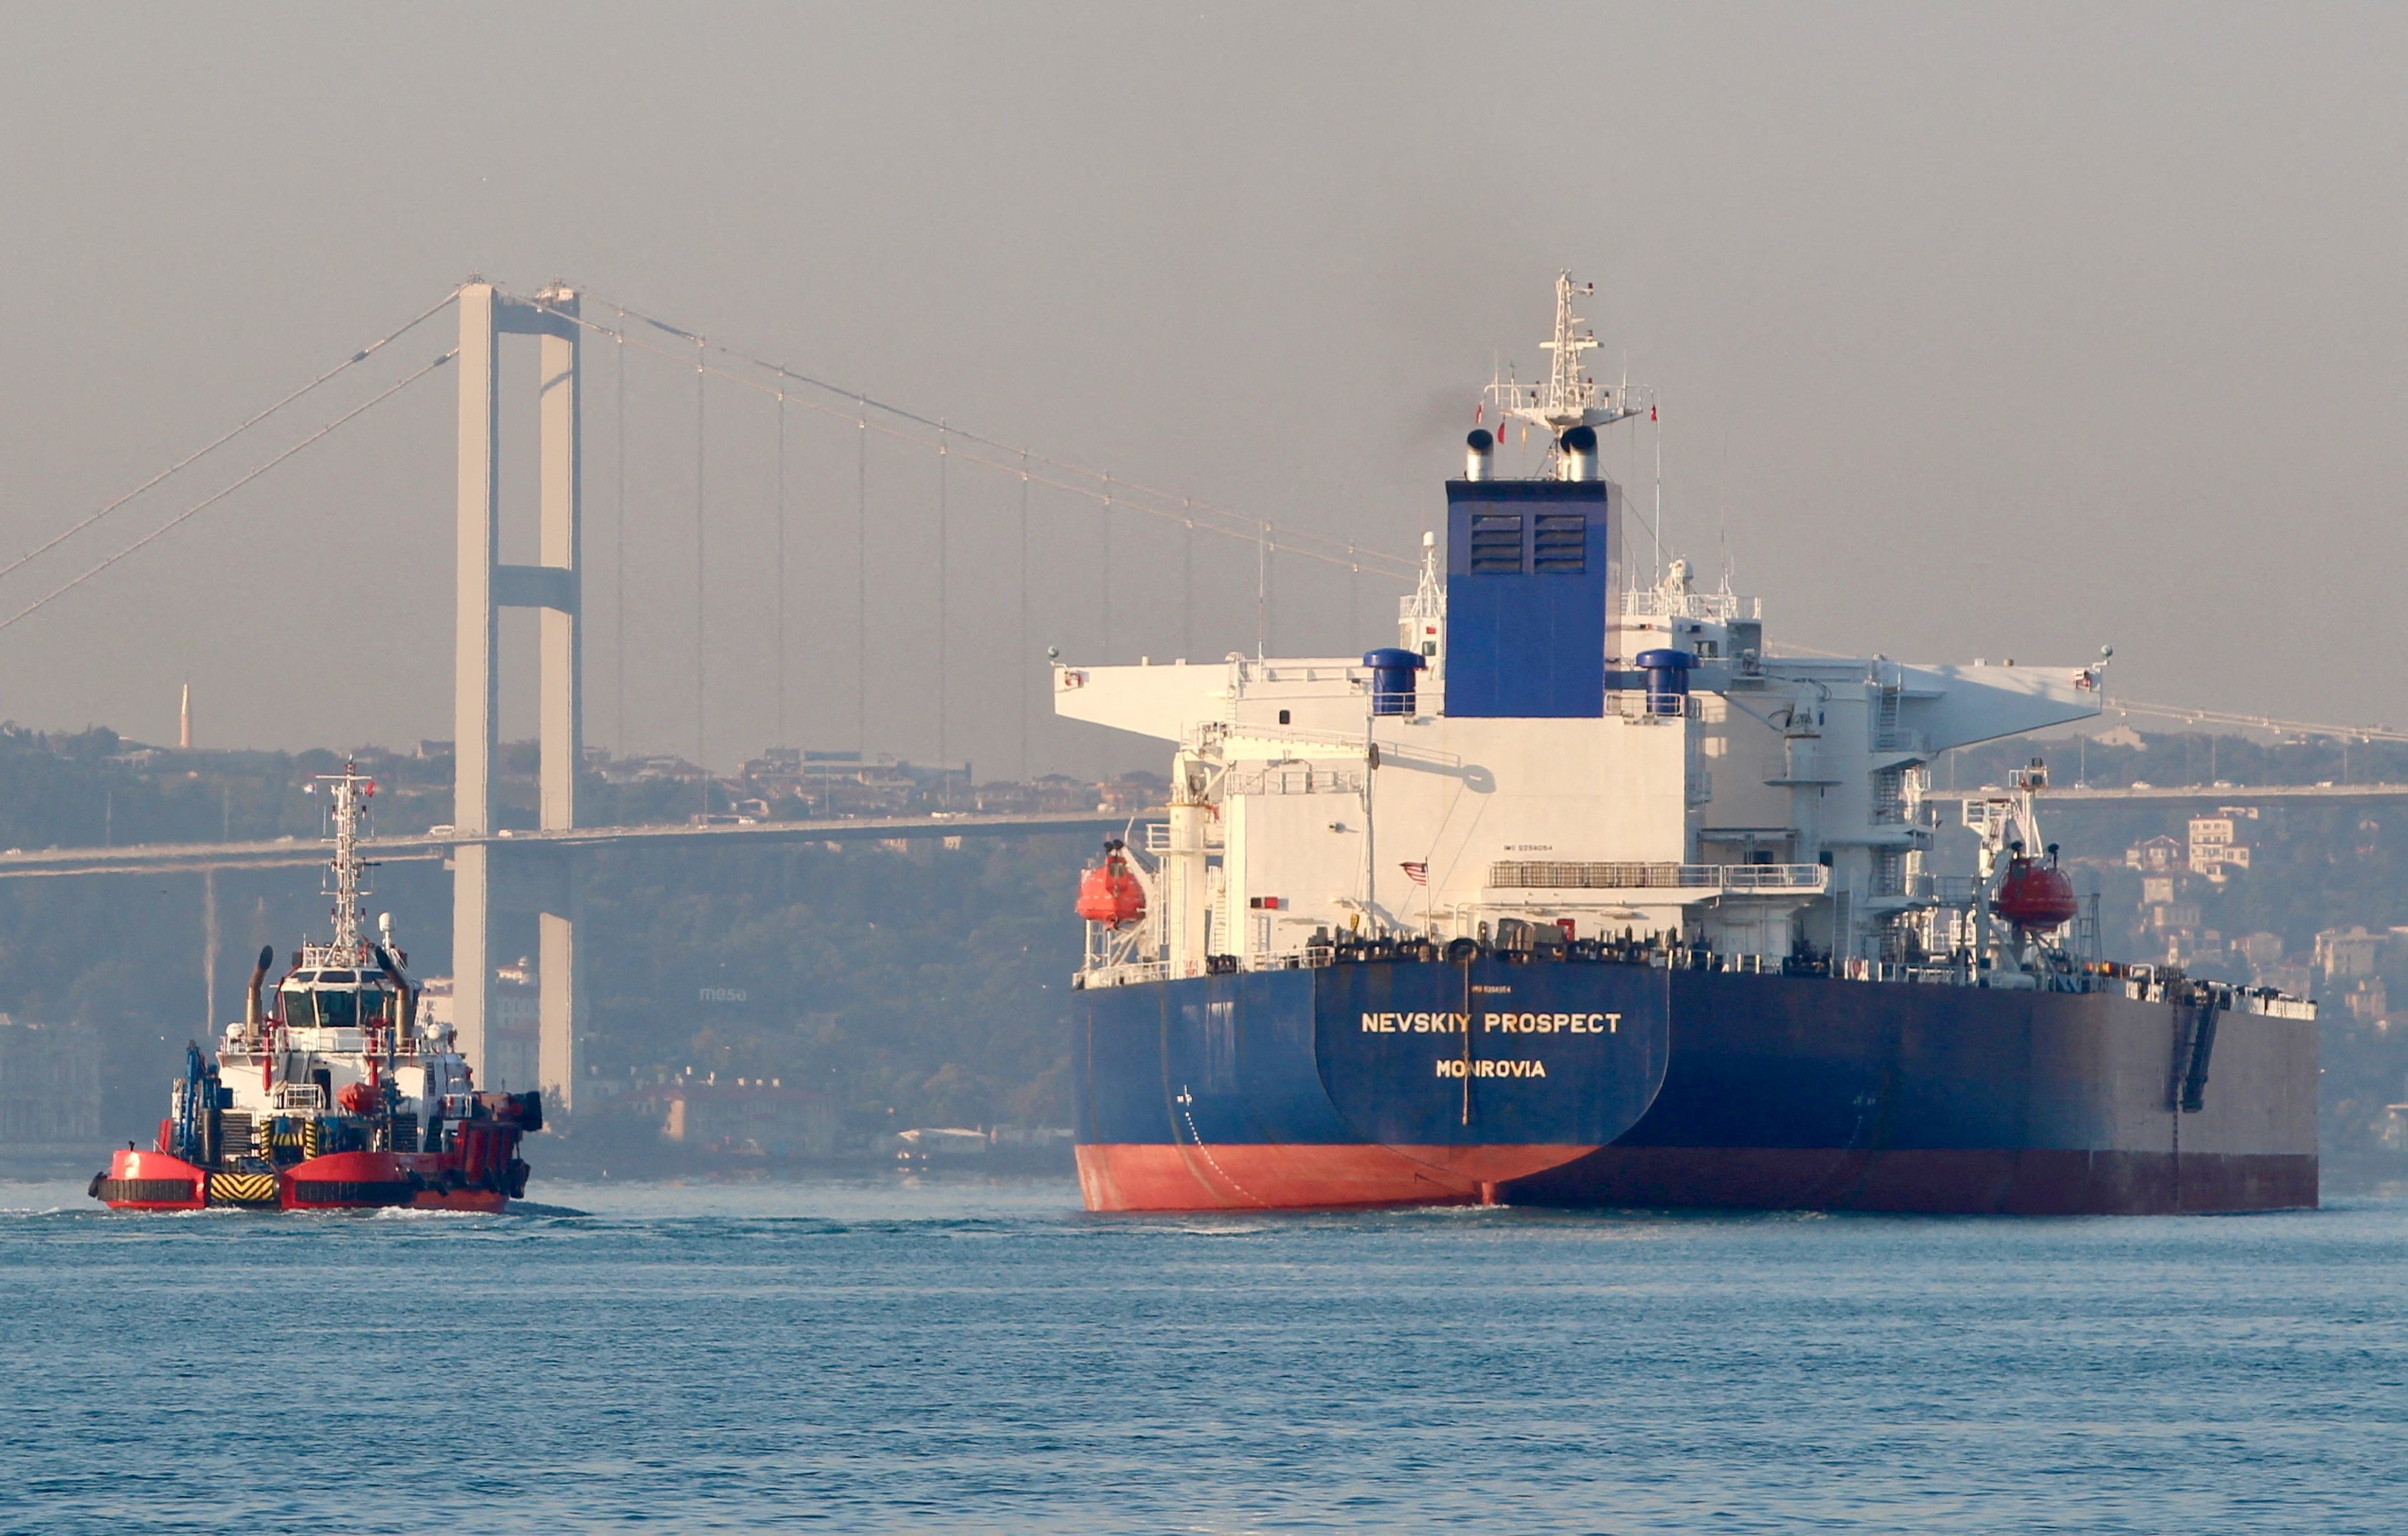 Crude oil tanker Nevskiy Prospect, owned by Russia's leading tanker group Sovcomflot, transits the Bosphorus in Istanbul, Turkey